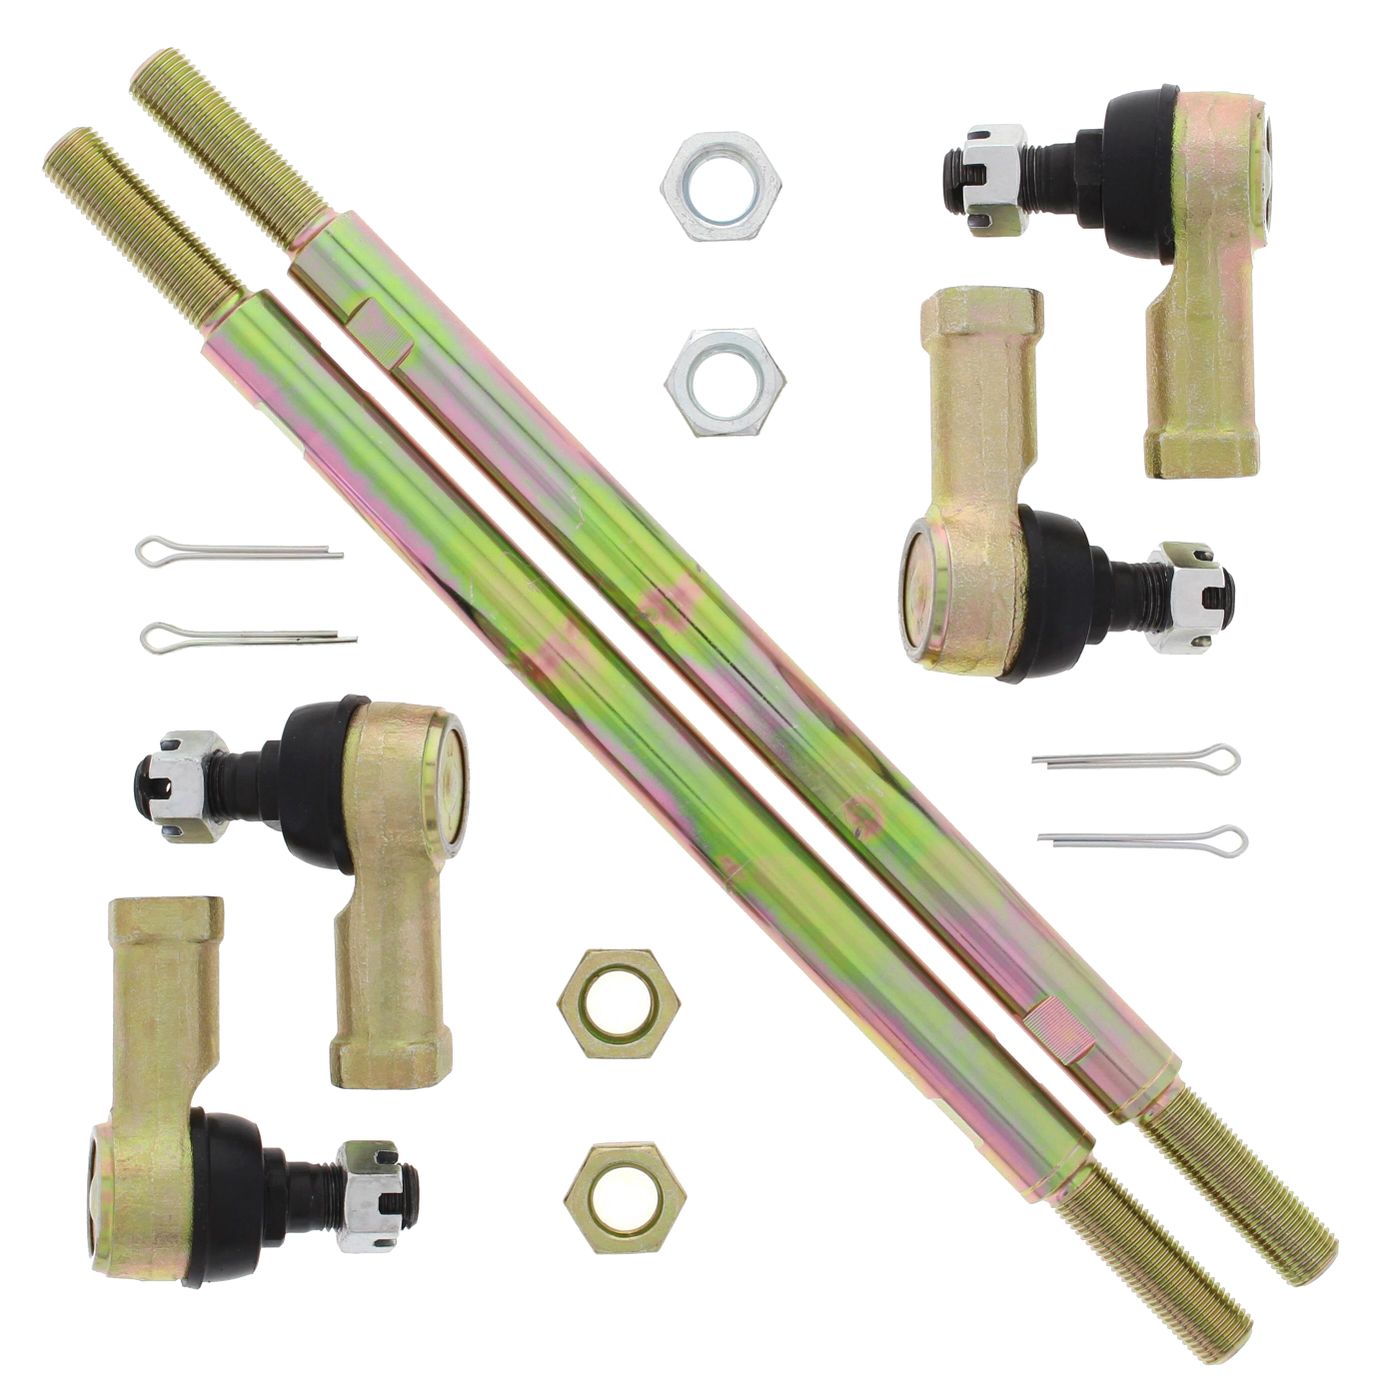 Wrp Tie Rod Kits - WRP521031 image